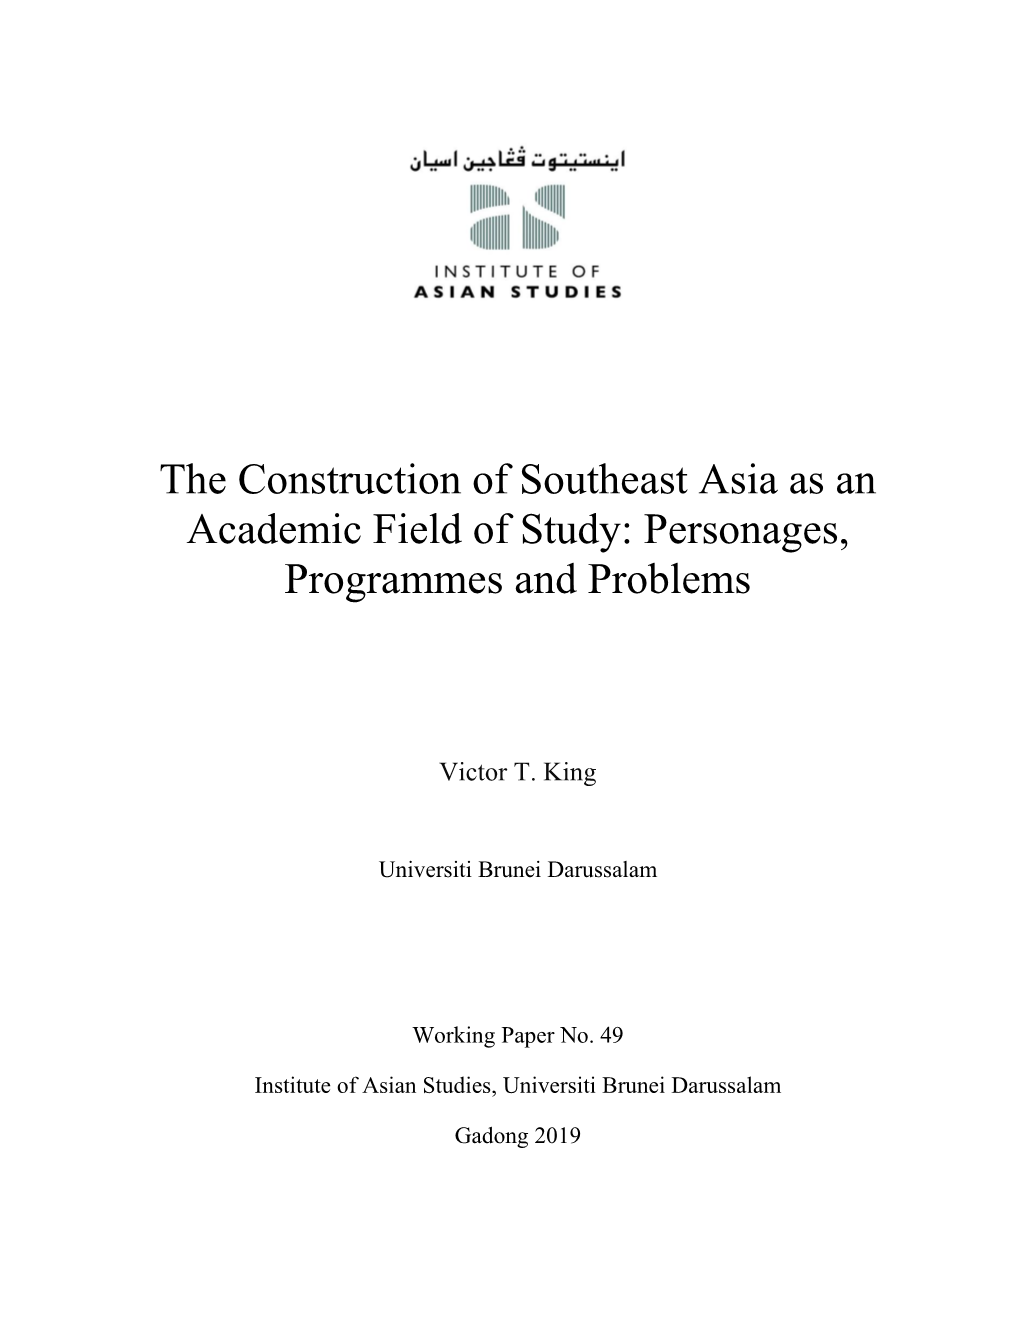 The Construction of Southeast Asia As an Academic Field of Study: Personages, Programmes and Problems